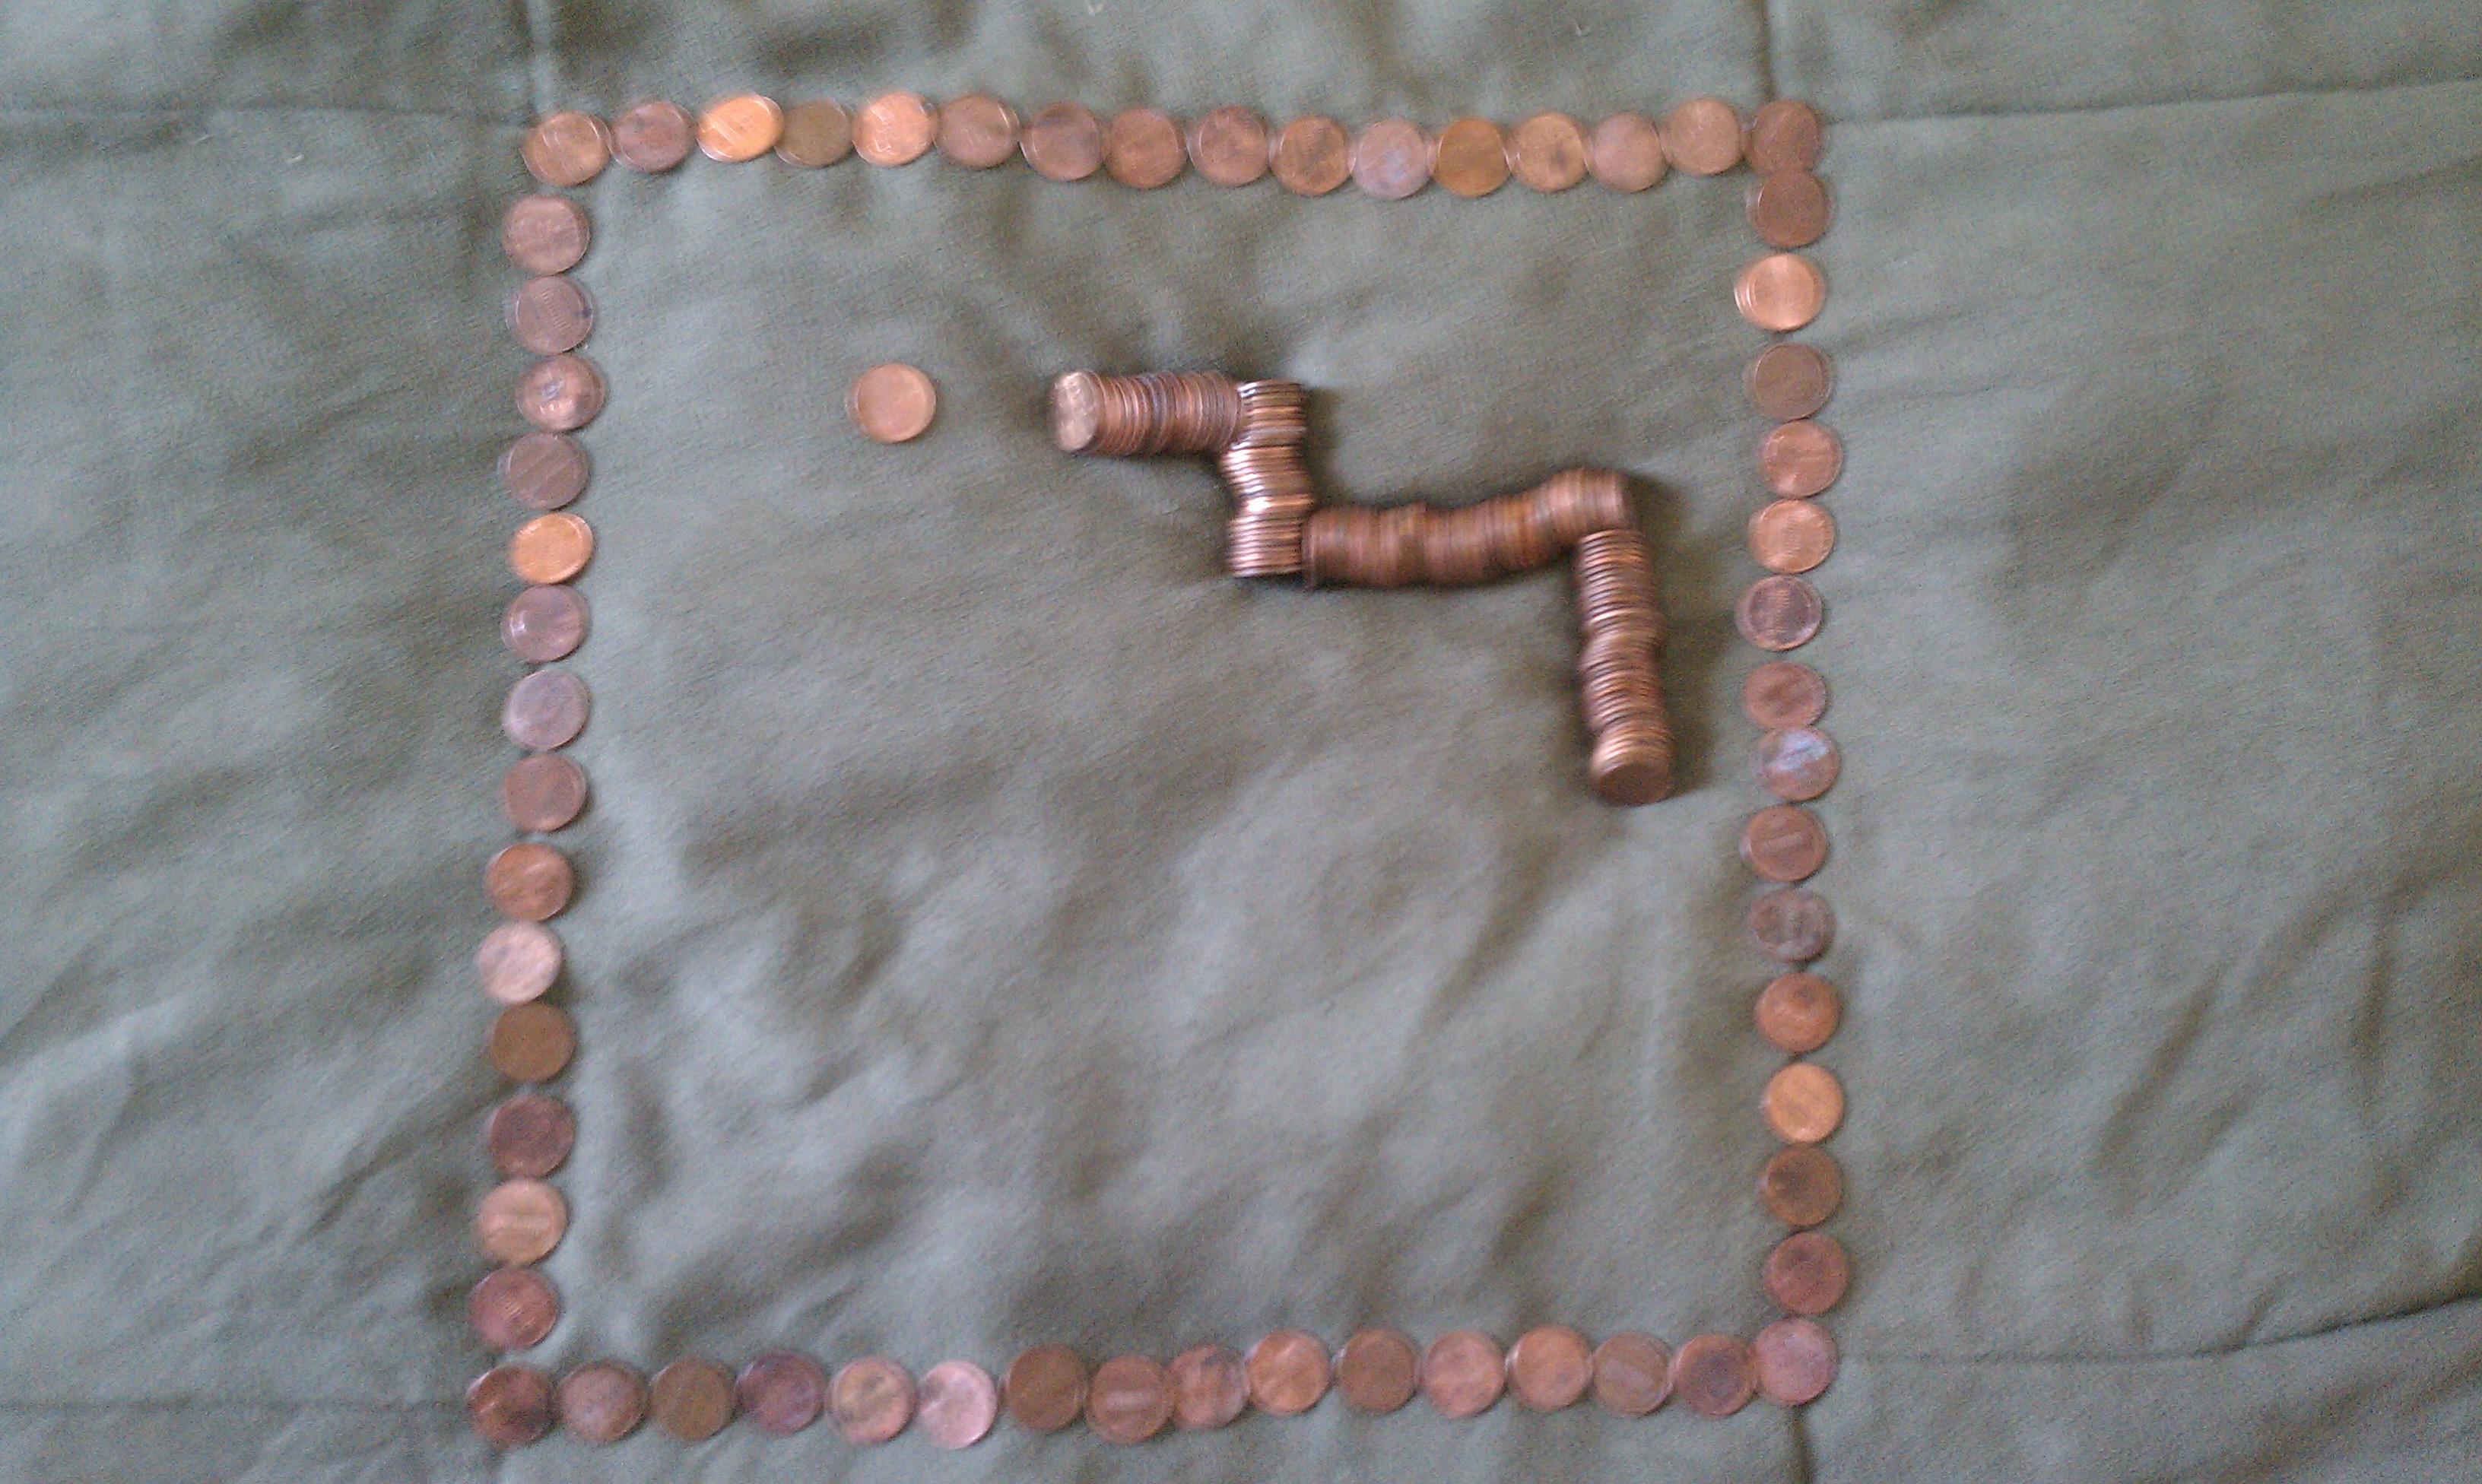 Playin' snake with pennies!